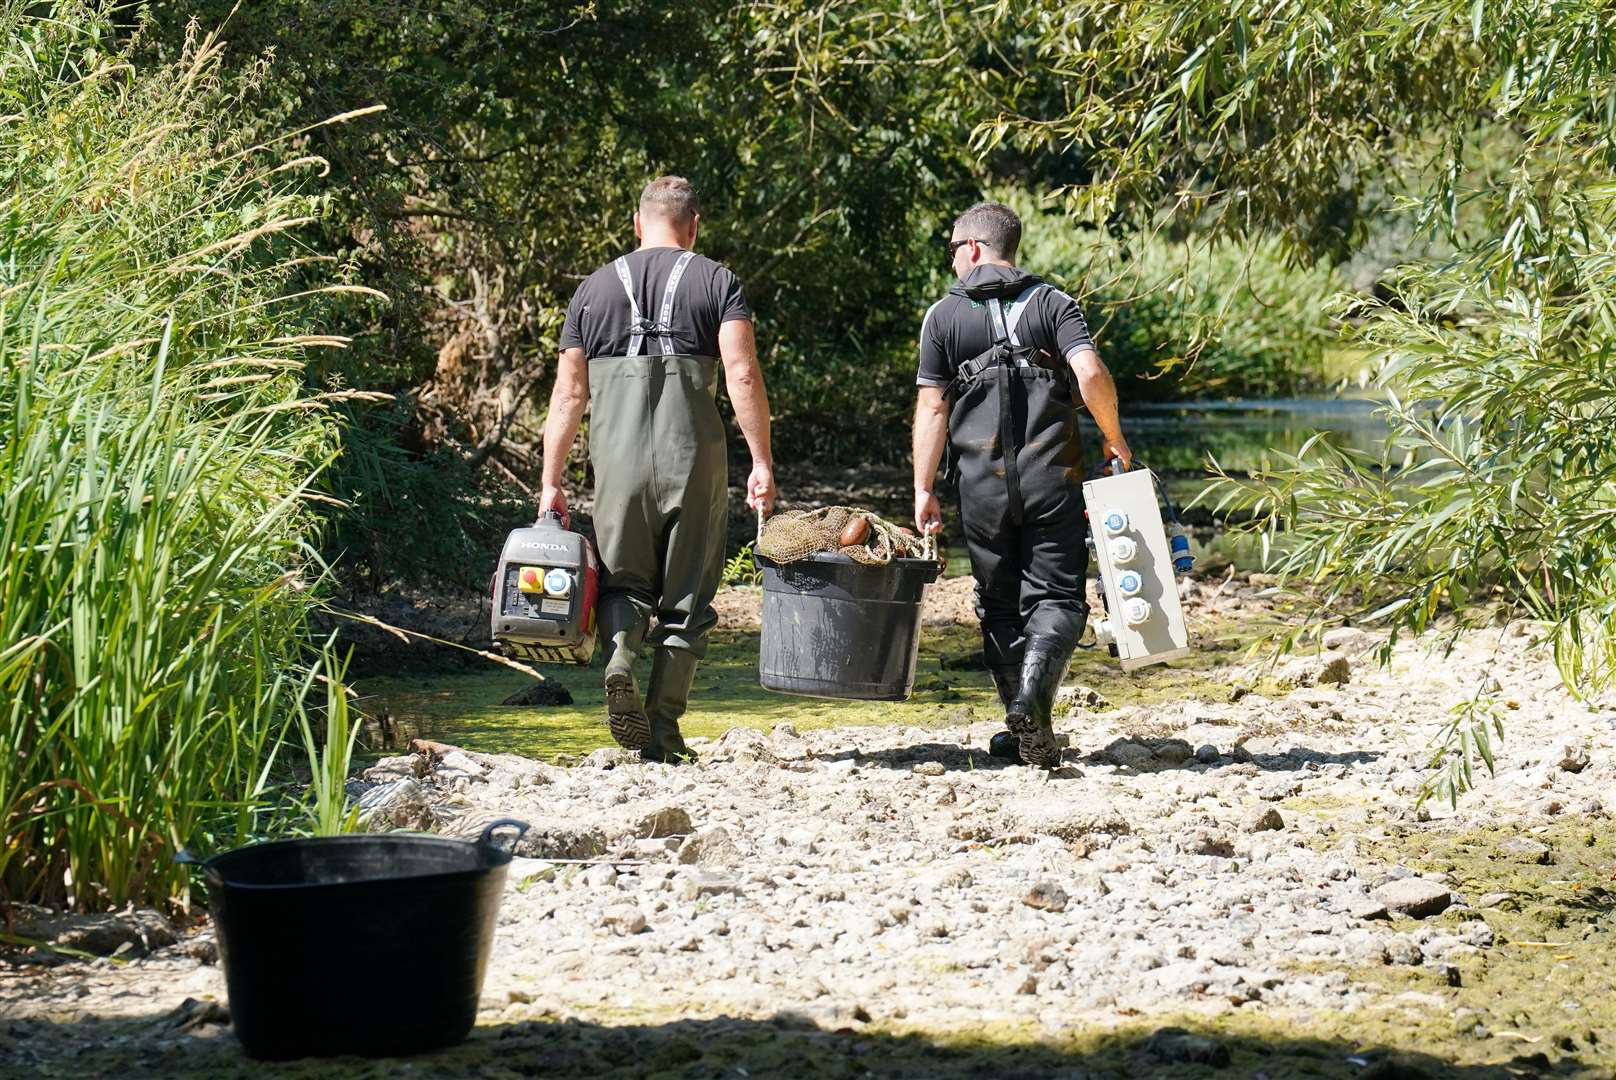 Fisheries officers from the Environment Agency remove equipment used to rescue fish from a drying pool of the River Mole (Jonathan Brady/PA)